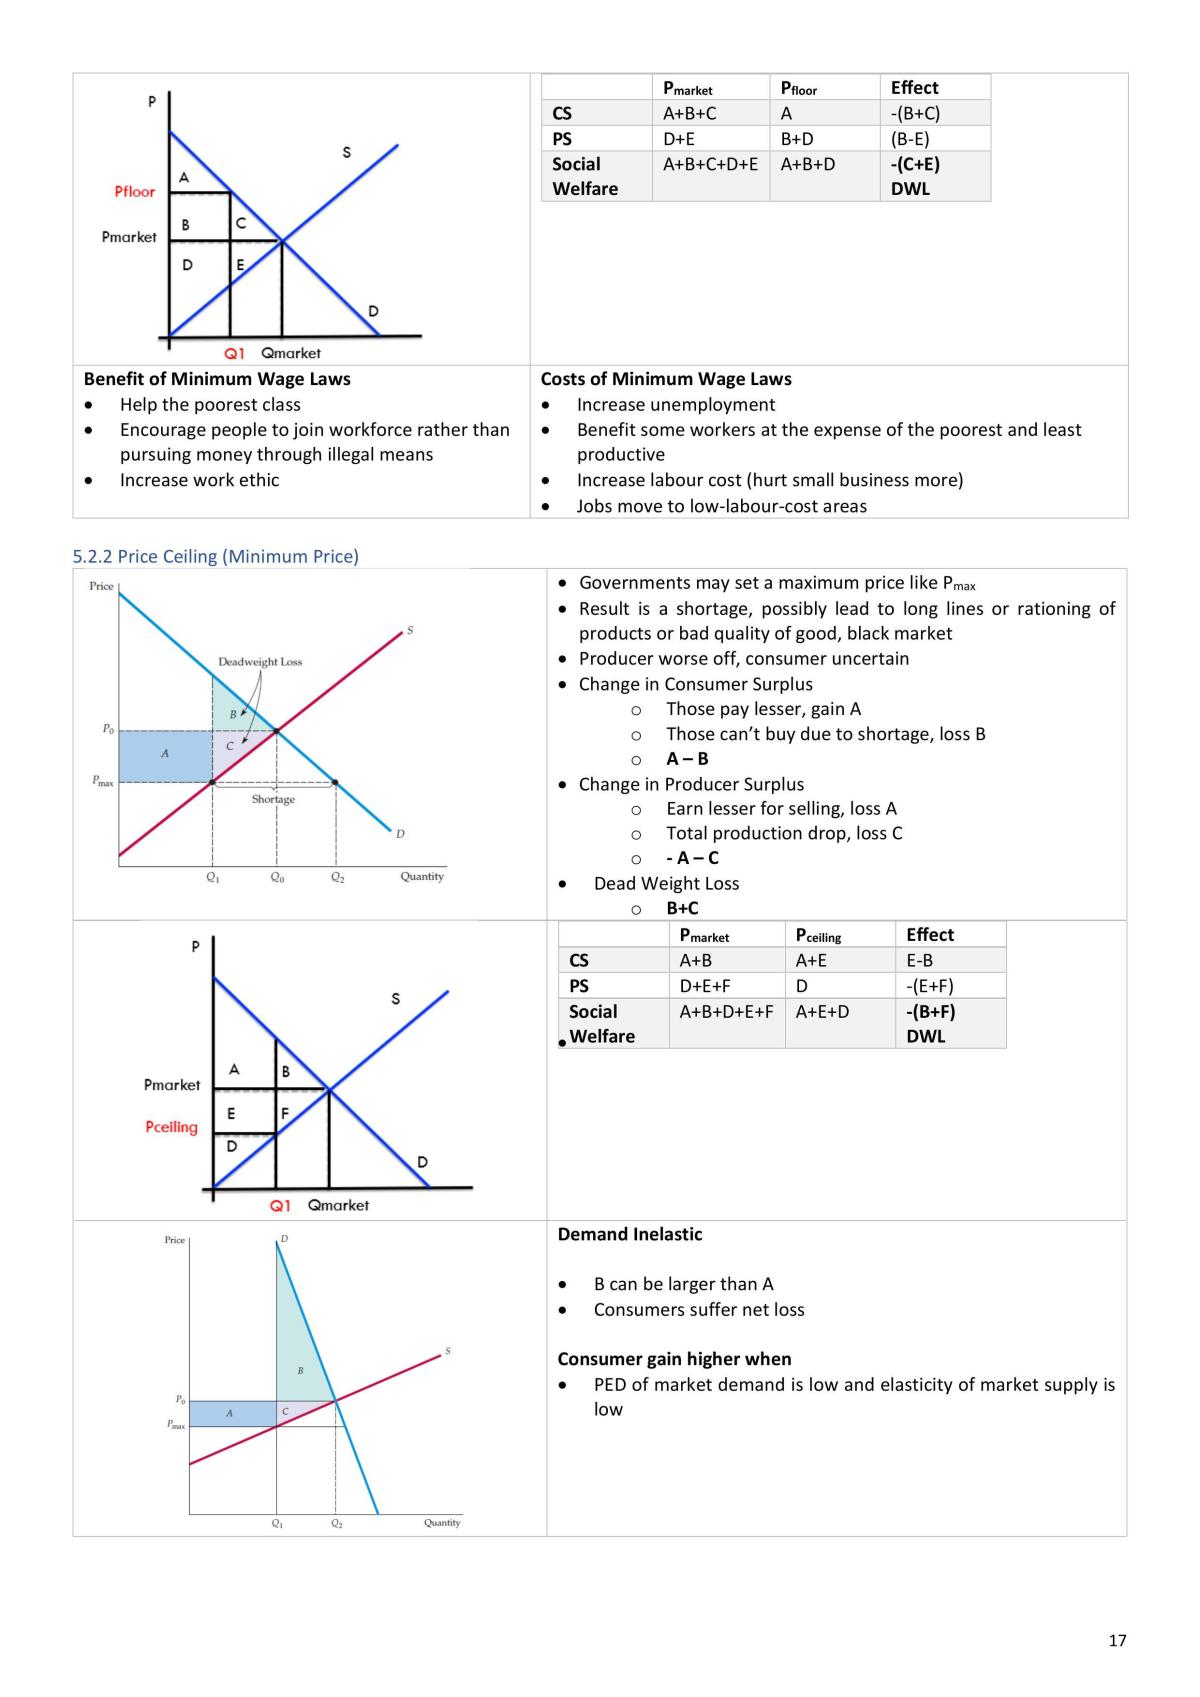 BSP1703 Exam Notes - Page 17